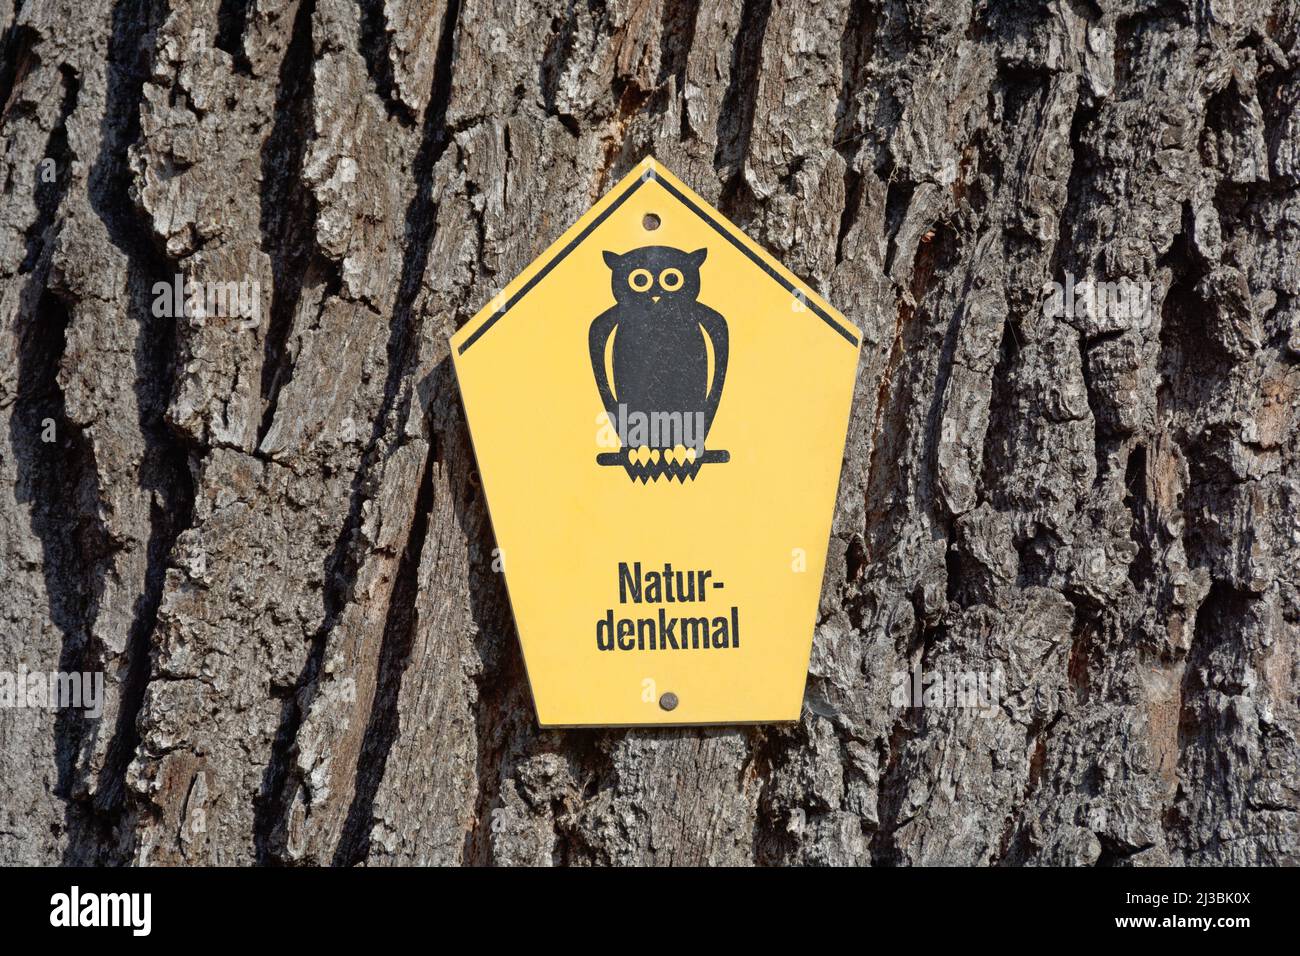 German sign on tree trunk 'Naturdenkmal' (natural monument) Stock Photo